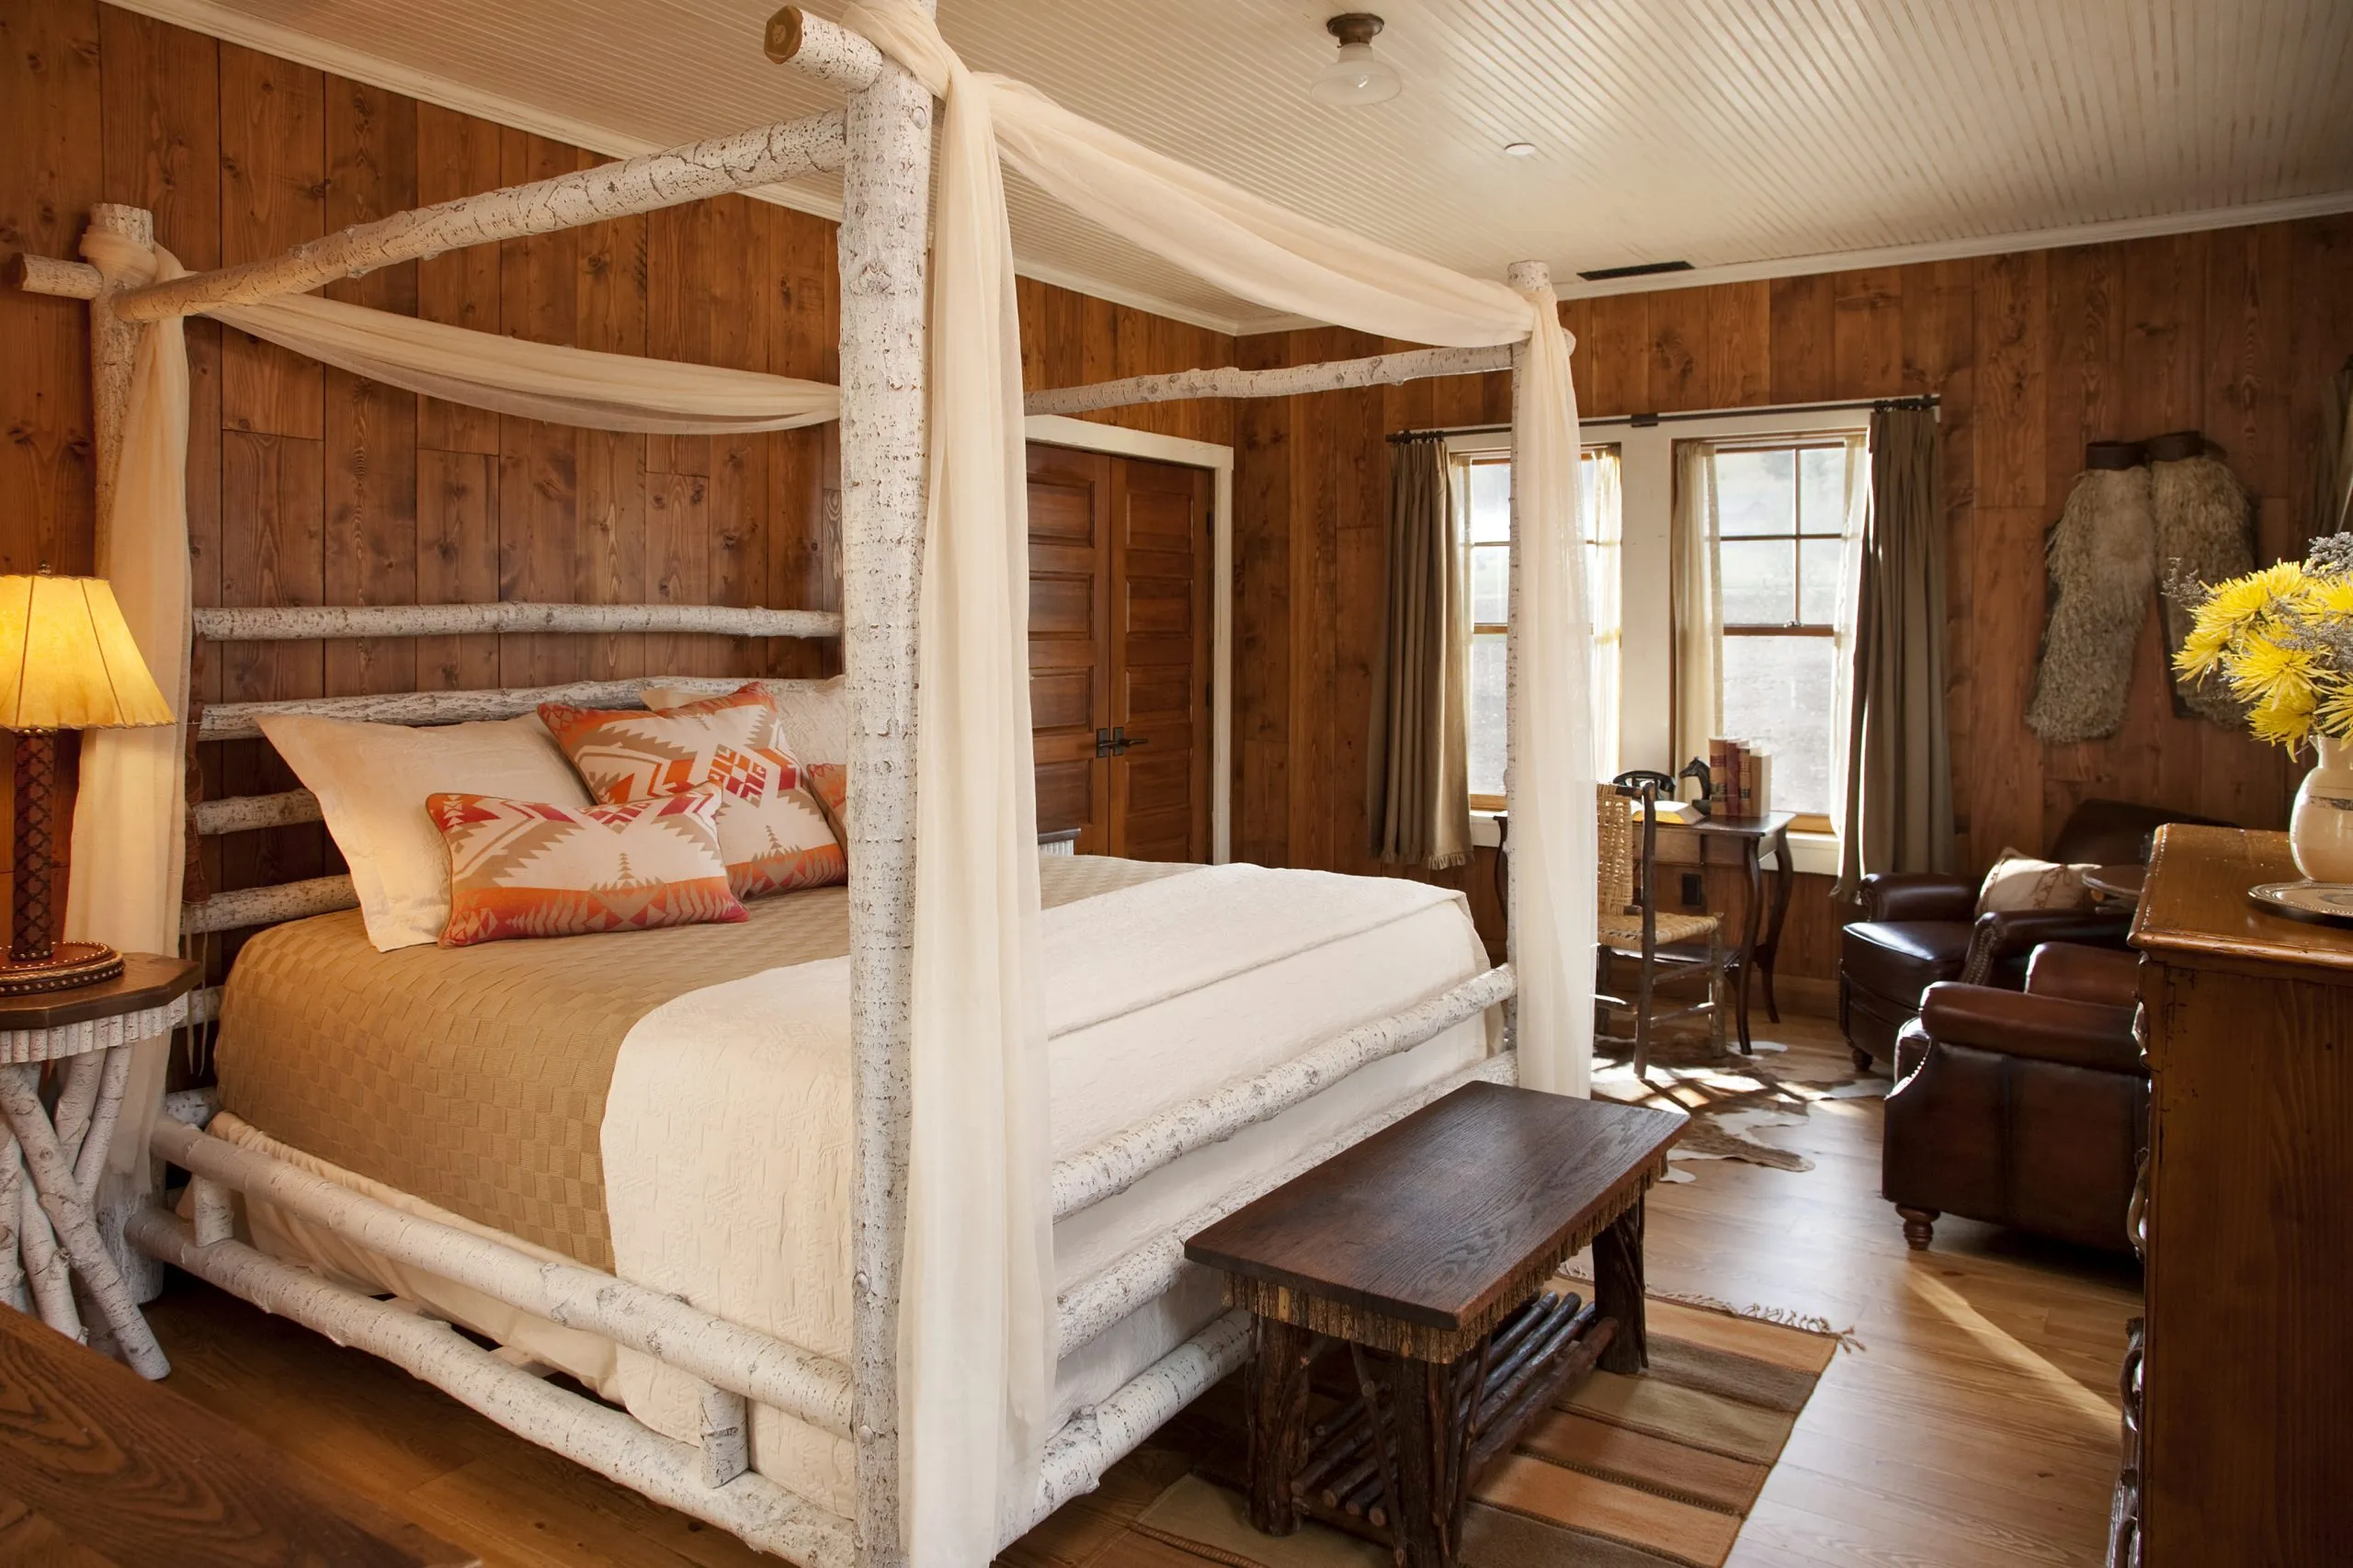 Cabin bedroom with white four post bed